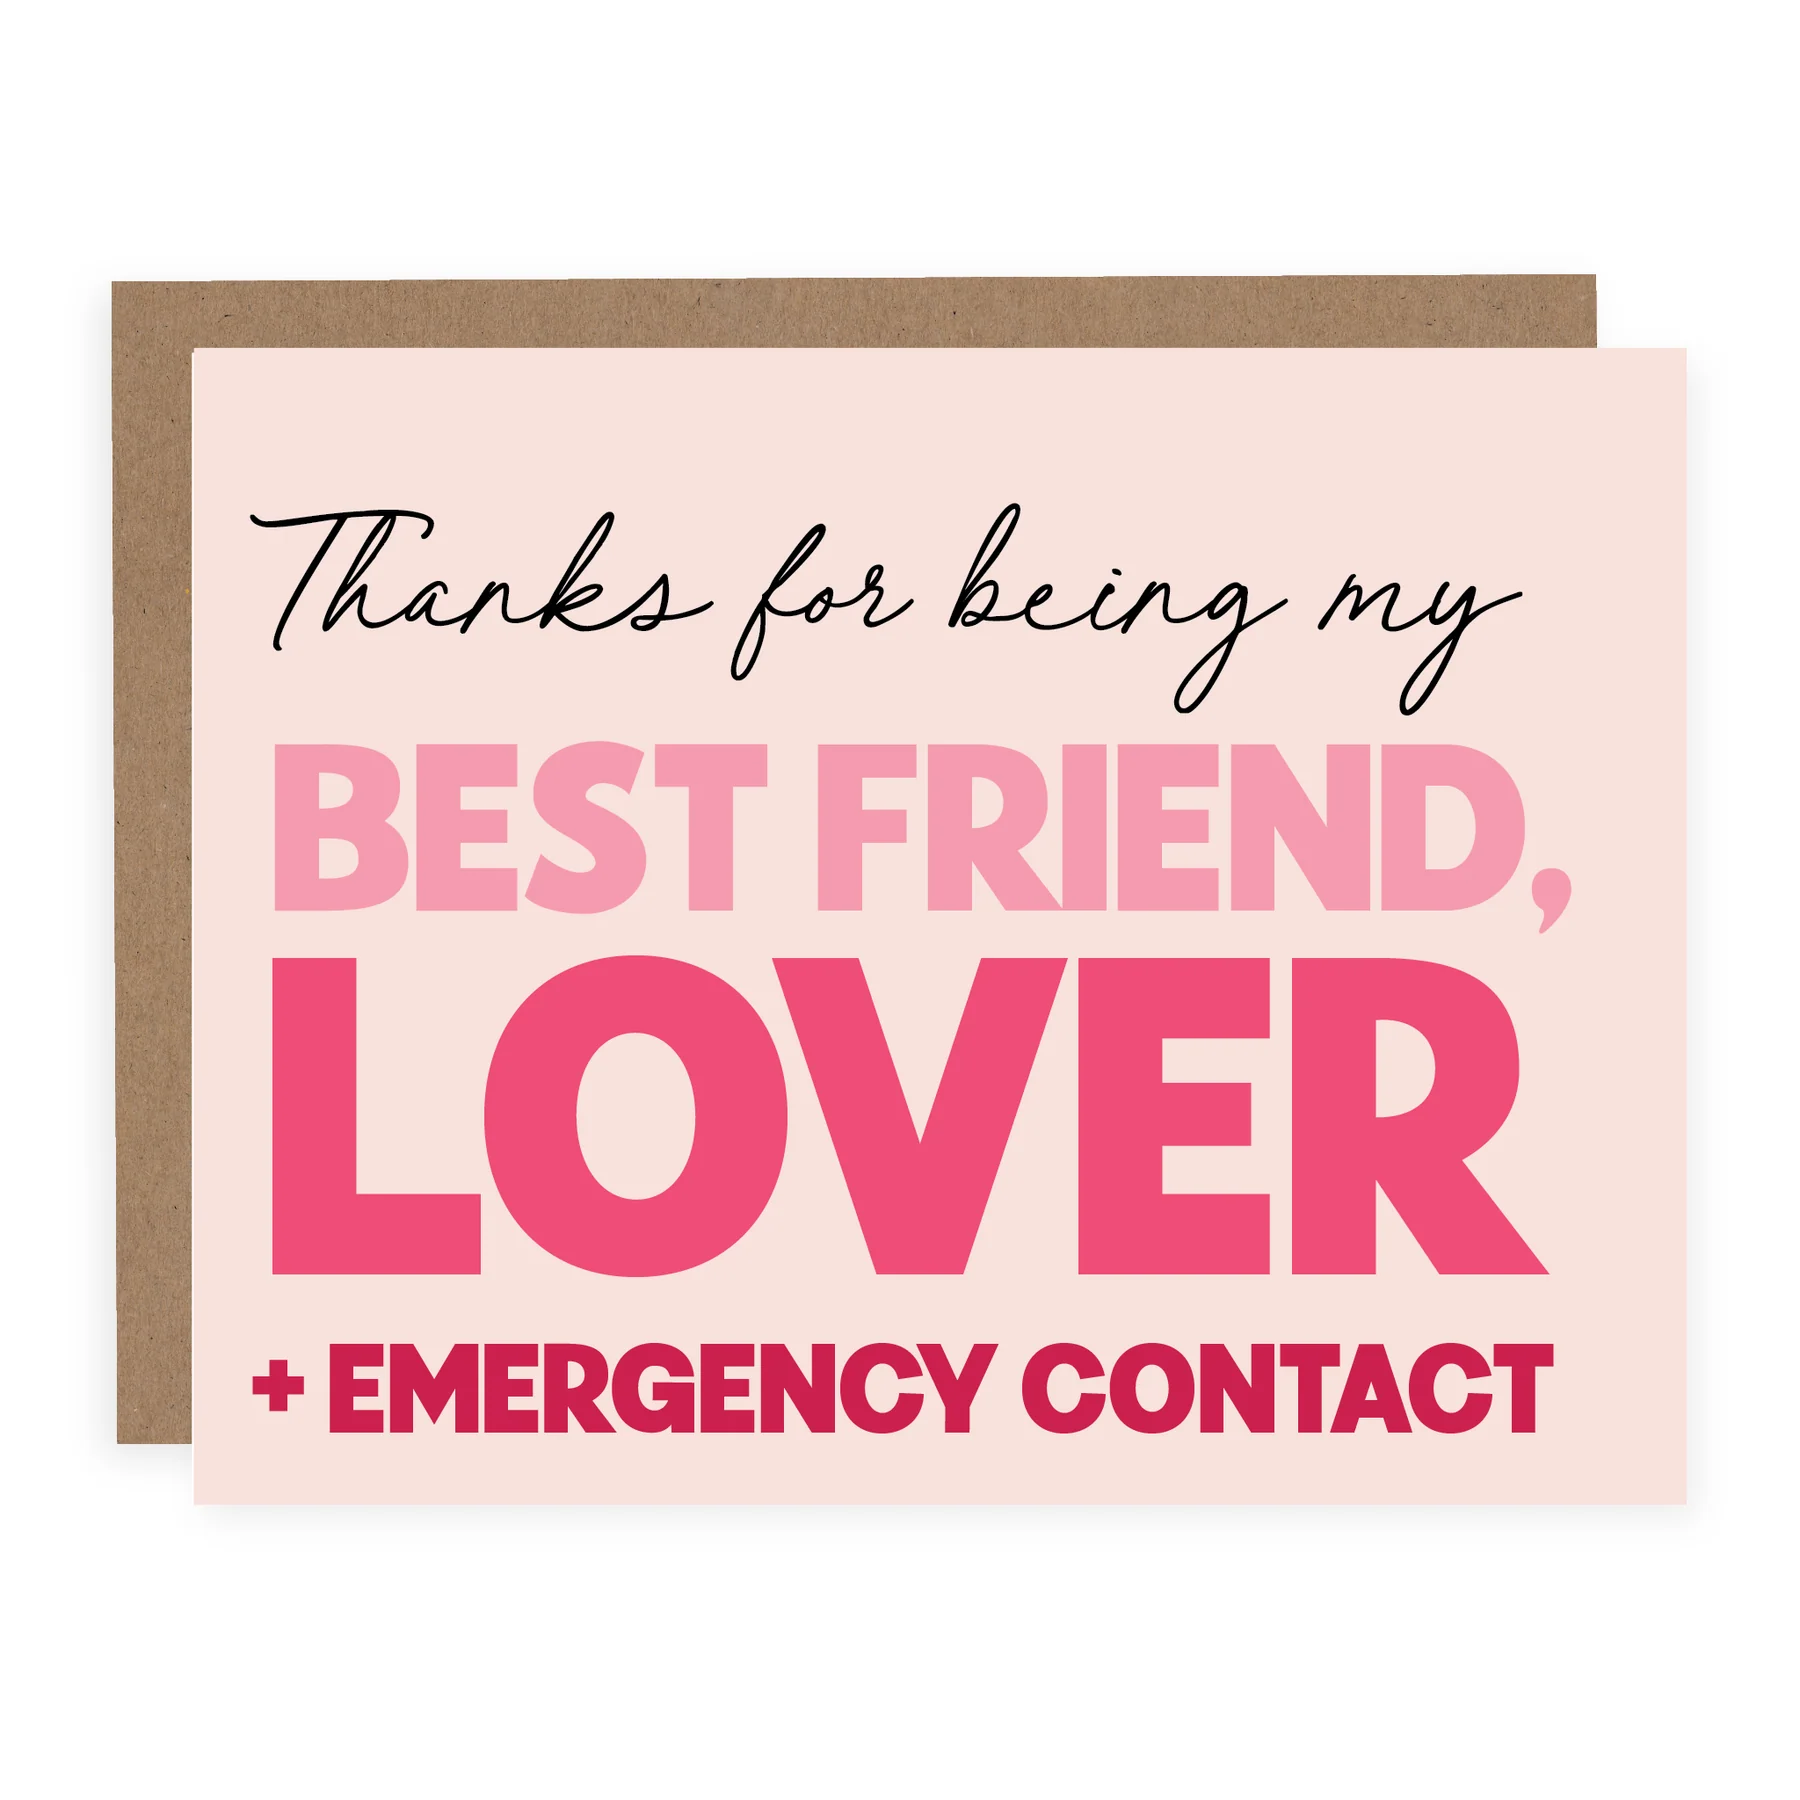 Pretty By Her - Best Friend, Lover & Emergency Contact